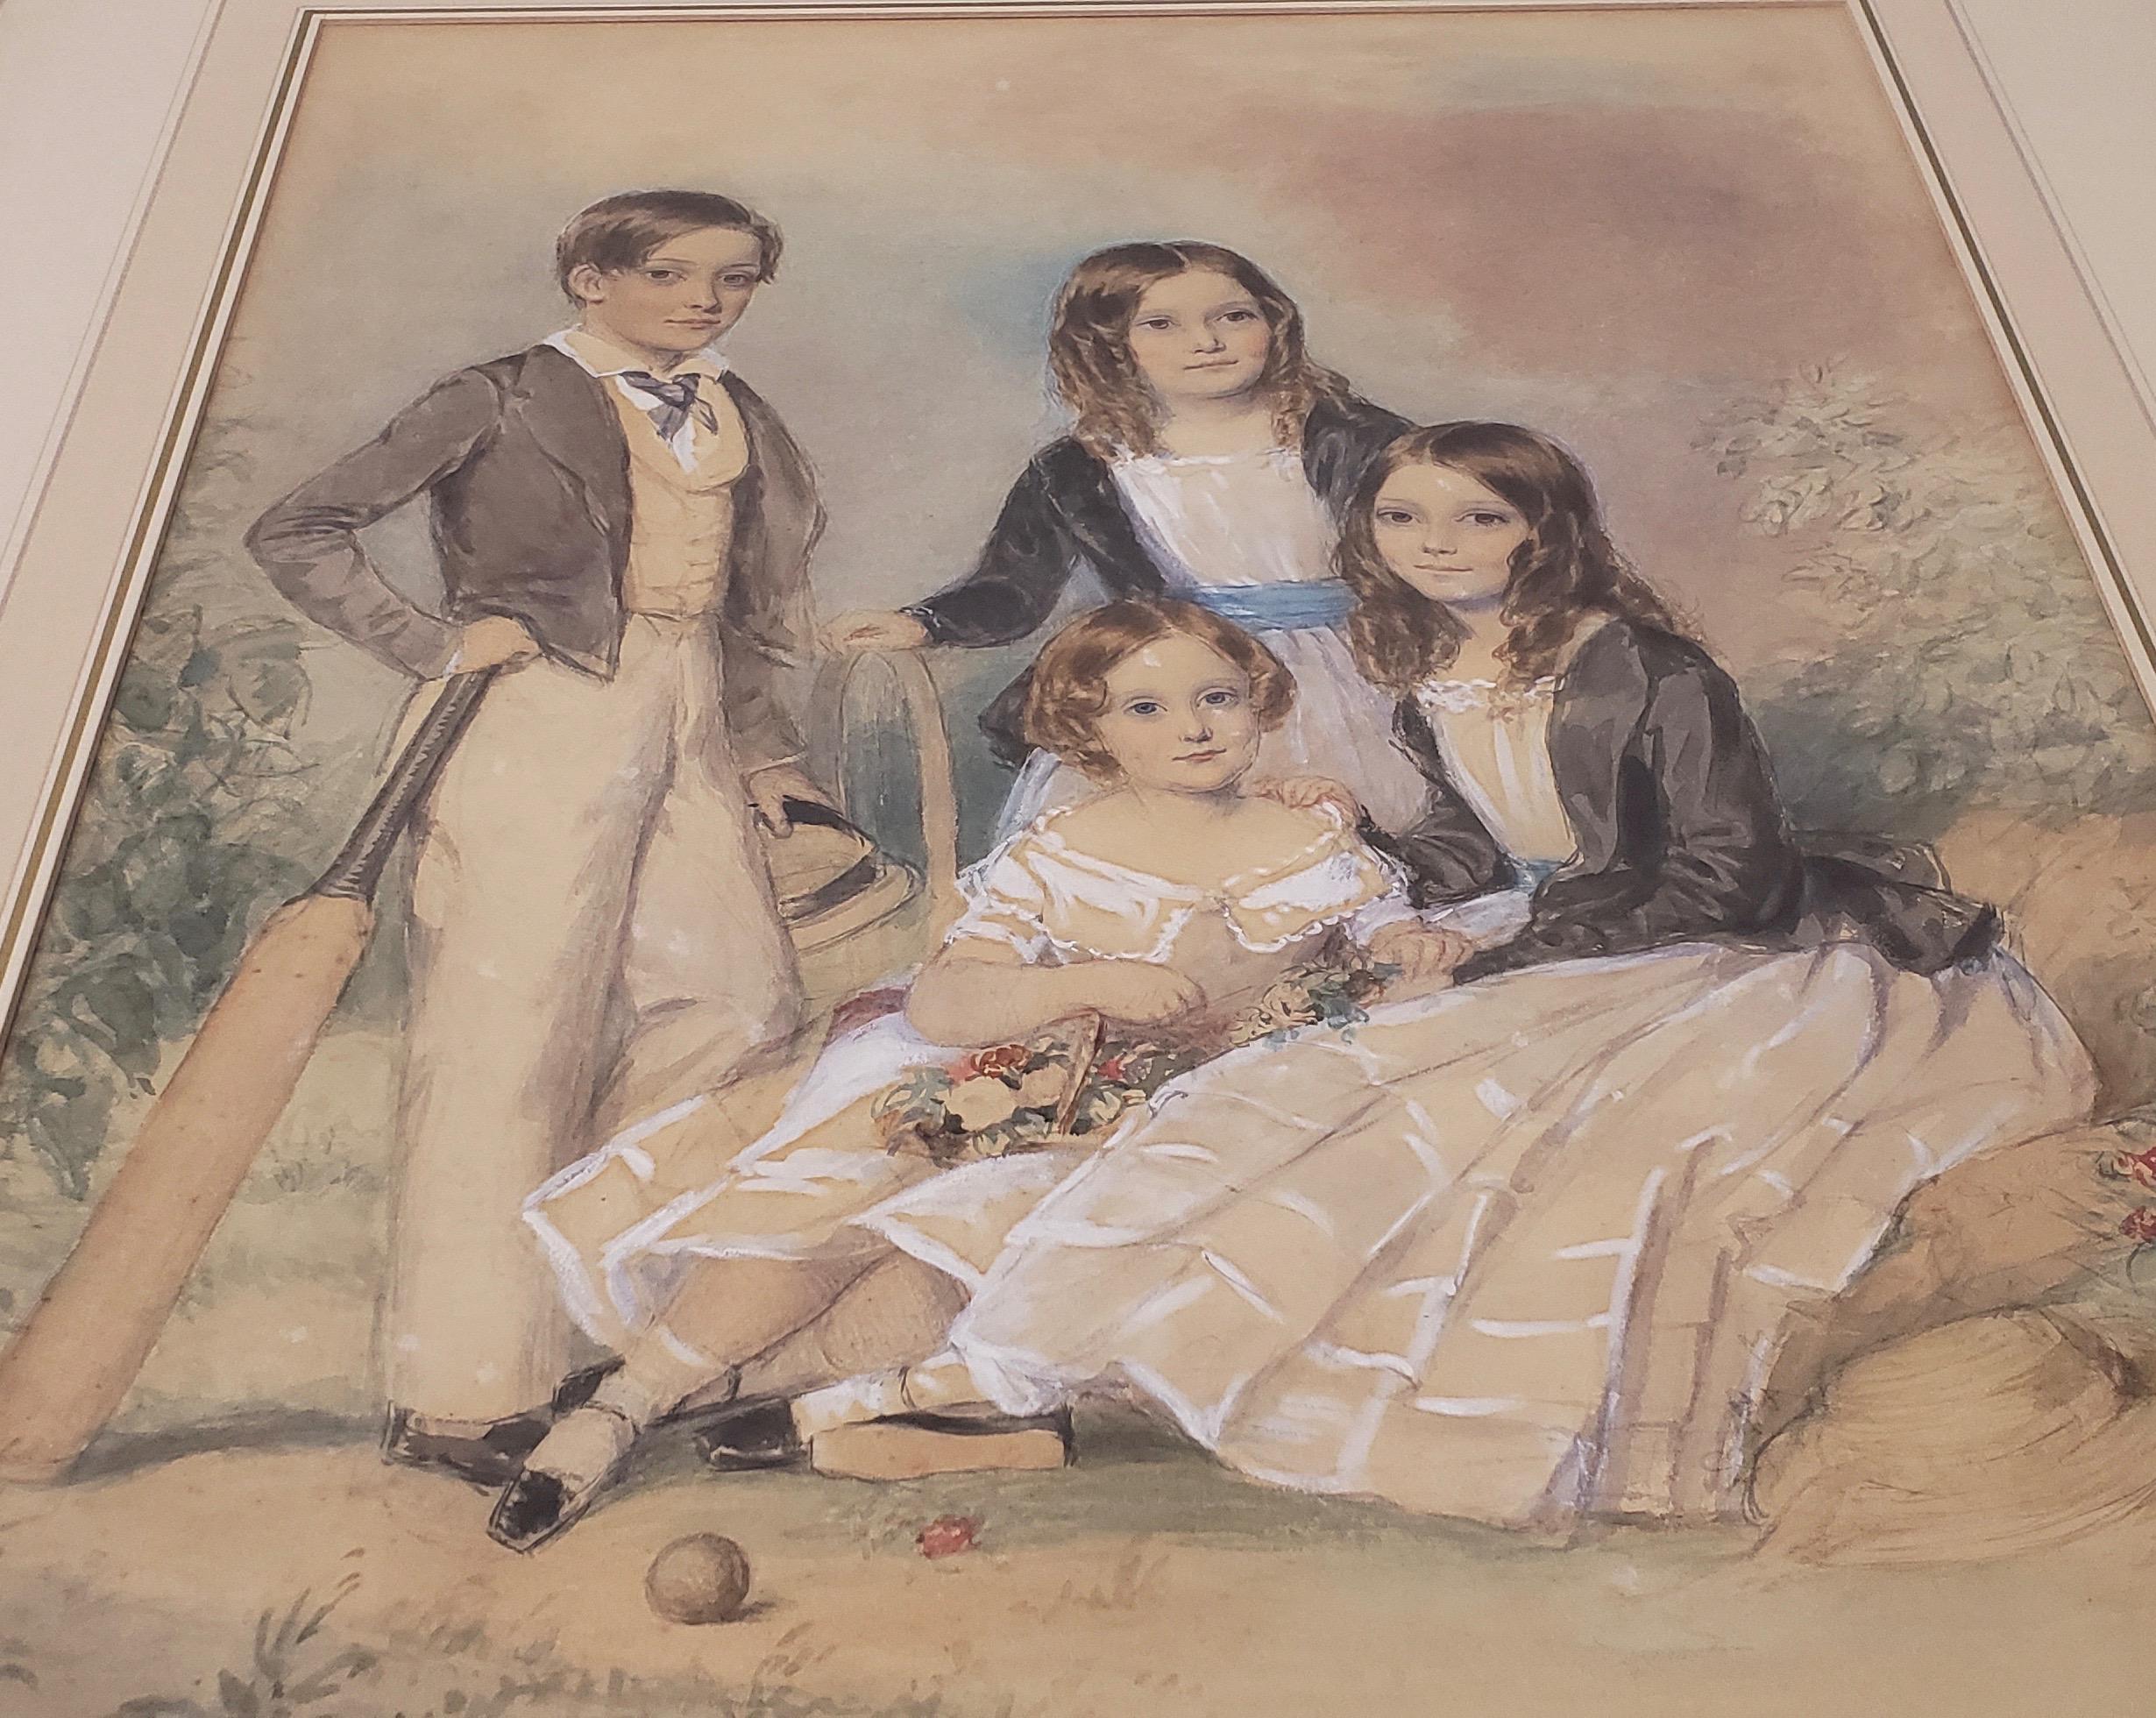 John Collingham Moore (England, 1829-1880) four children, circa 1860s

Rare pencil, watercolor and white wash by listed artist John Collingham Moore, 19th century.

Here we have the children of Henry and Elizabeth Young. Young Henry stands with his